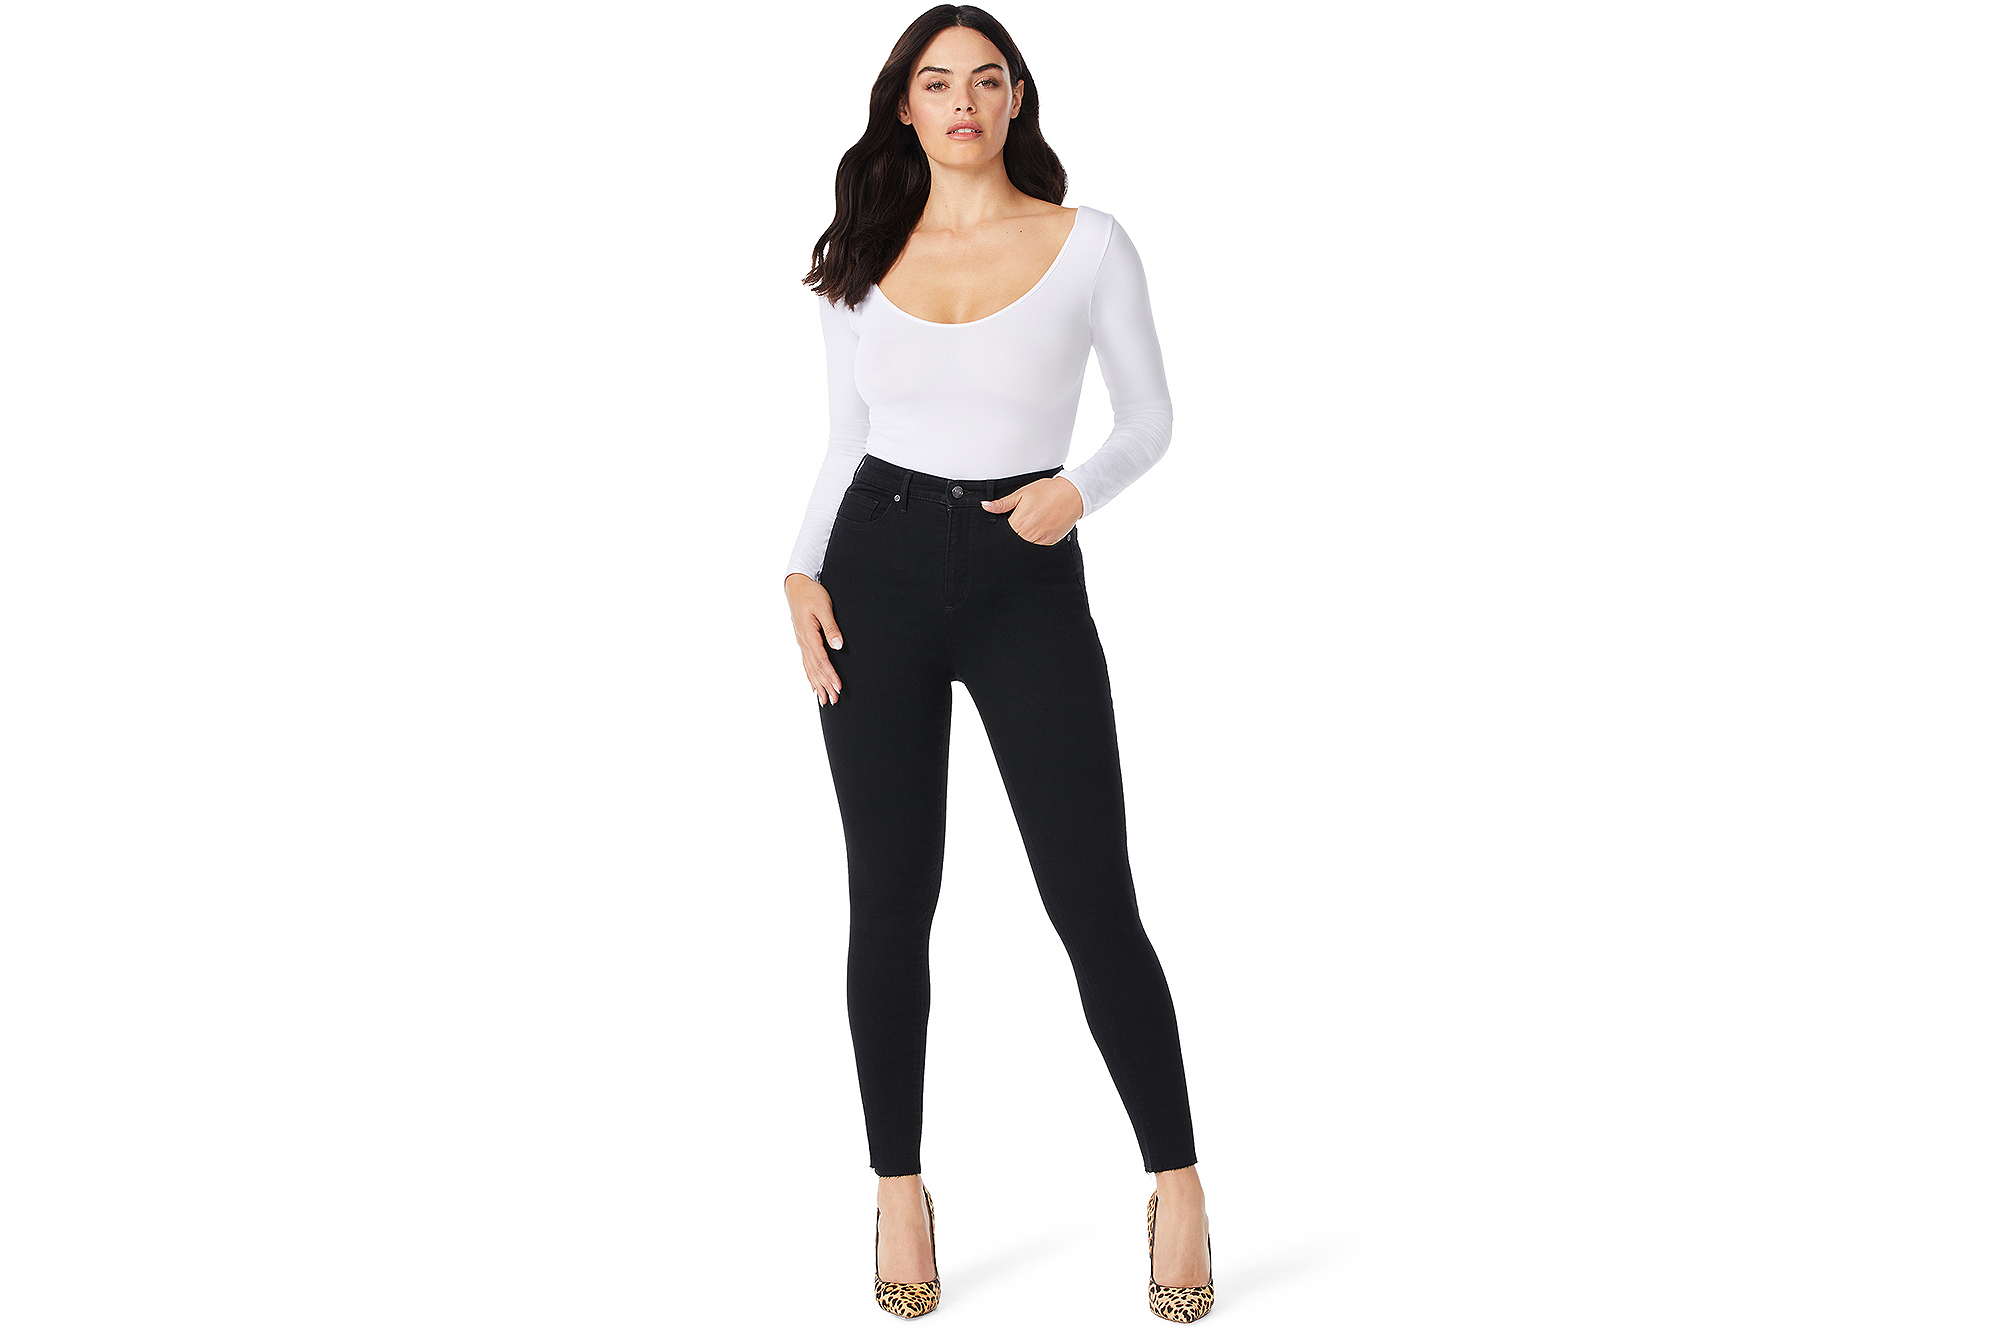 Sofia Jeans Women's Plus Size Rosa Curvy High-Waist Pull-On Ankle